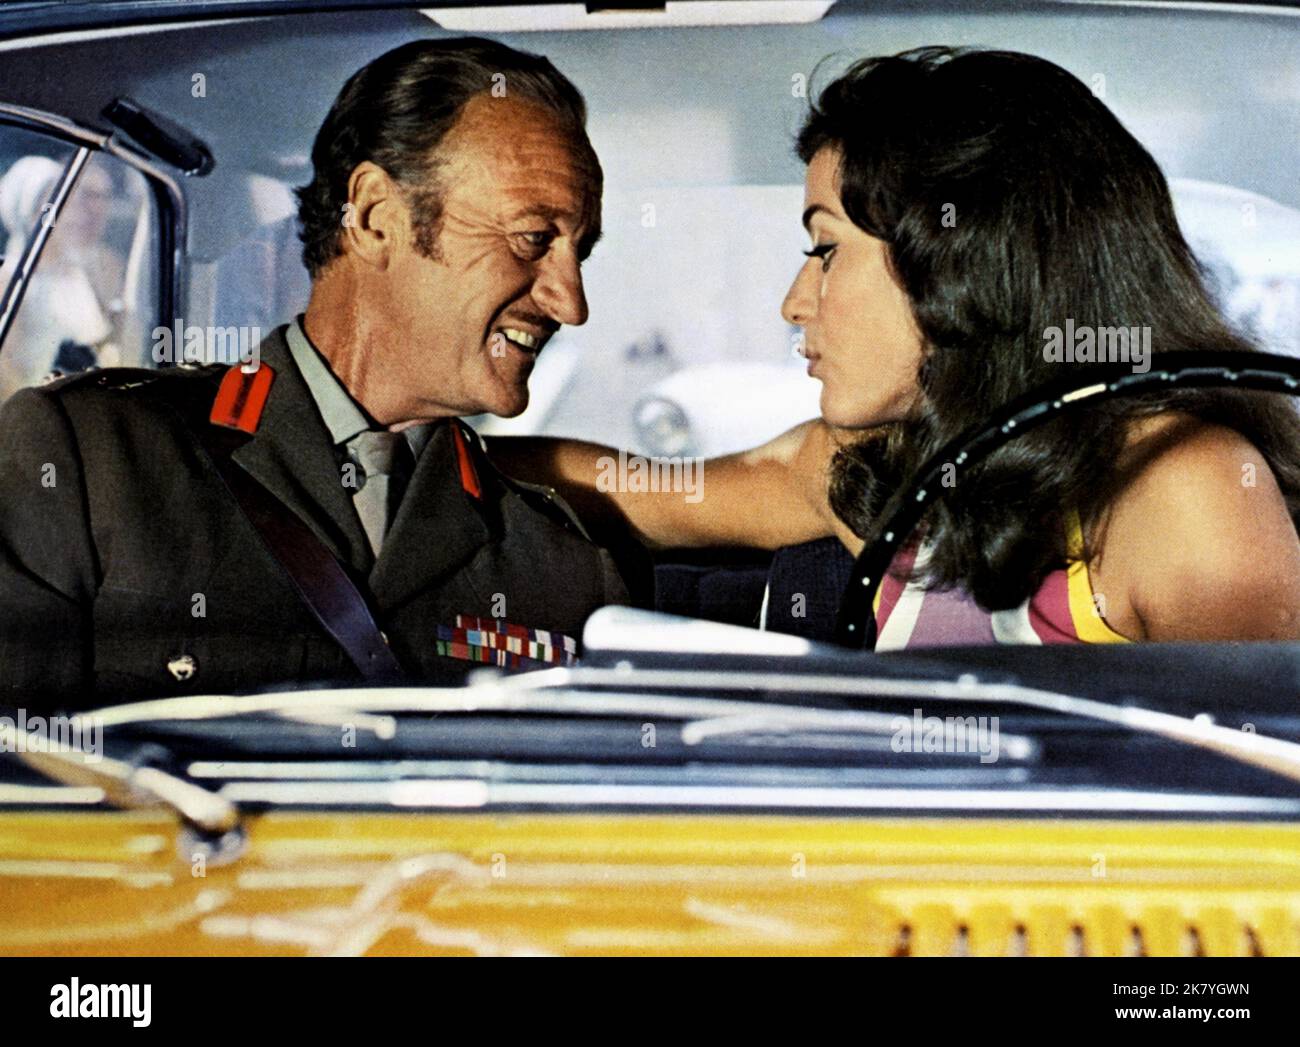 https://c8.alamy.com/comp/2K7YGWN/david-niven-silvia-monti-film-the-brain-le-cerveau-le-cerveau-characters-col-carol-matthews-sofia-frit-1969-director-gerard-oury-07-march-1969-warning-this-photograph-is-for-editorial-use-only-and-is-the-copyright-of-gaumont-international-andor-the-photographer-assigned-by-the-film-or-production-company-and-can-only-be-reproduced-by-publications-in-conjunction-with-the-promotion-of-the-above-film-a-mandatory-credit-to-gaumont-international-is-required-the-photographer-should-also-be-credited-when-known-no-commercial-use-can-be-granted-without-written-authority-from-the-2K7YGWN.jpg